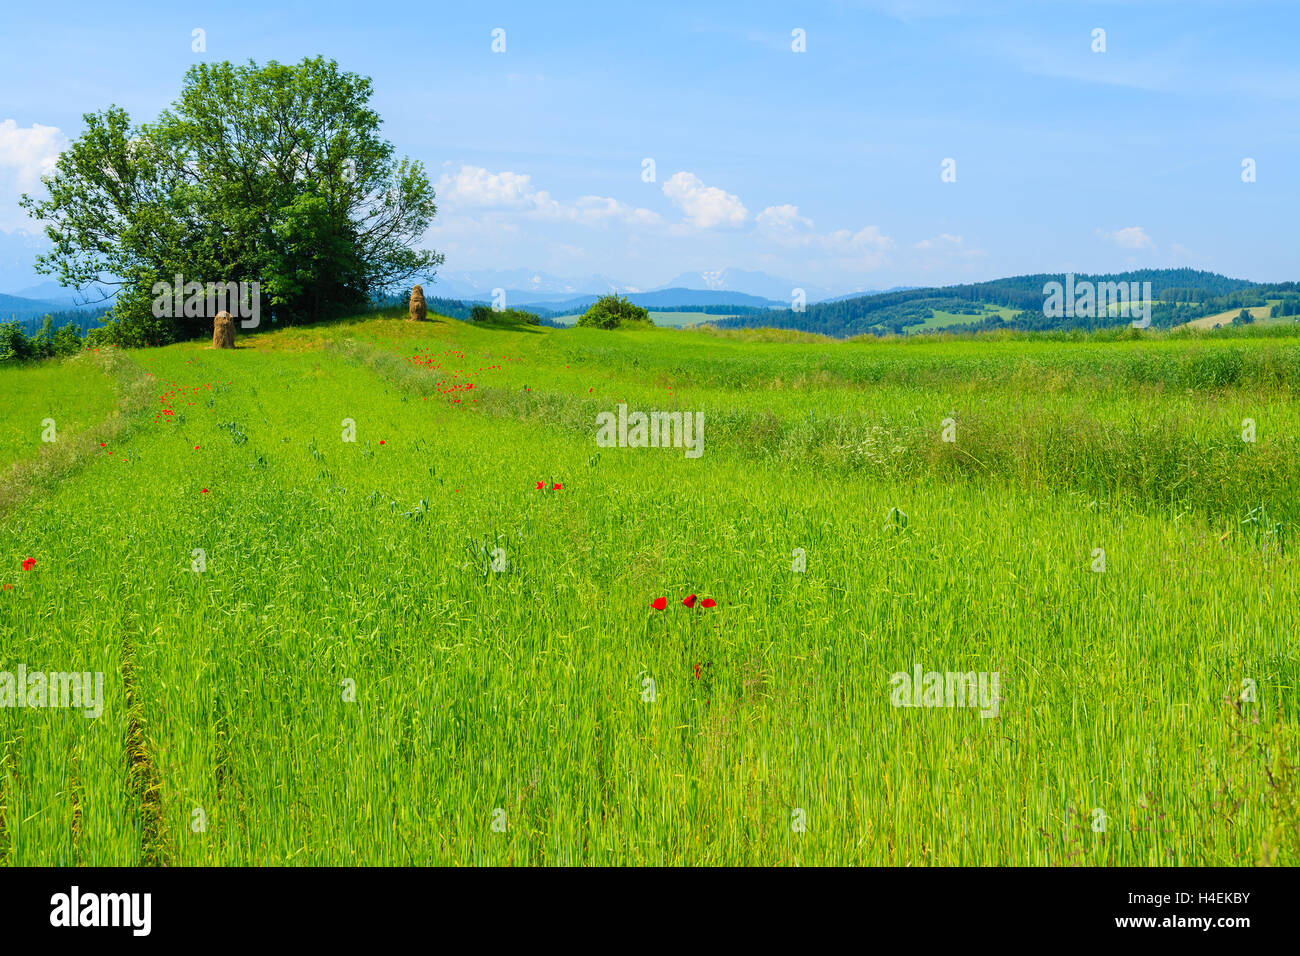 Green field and red poppy flowers in summer landscape, Pieniny Mountains, Poland Stock Photo